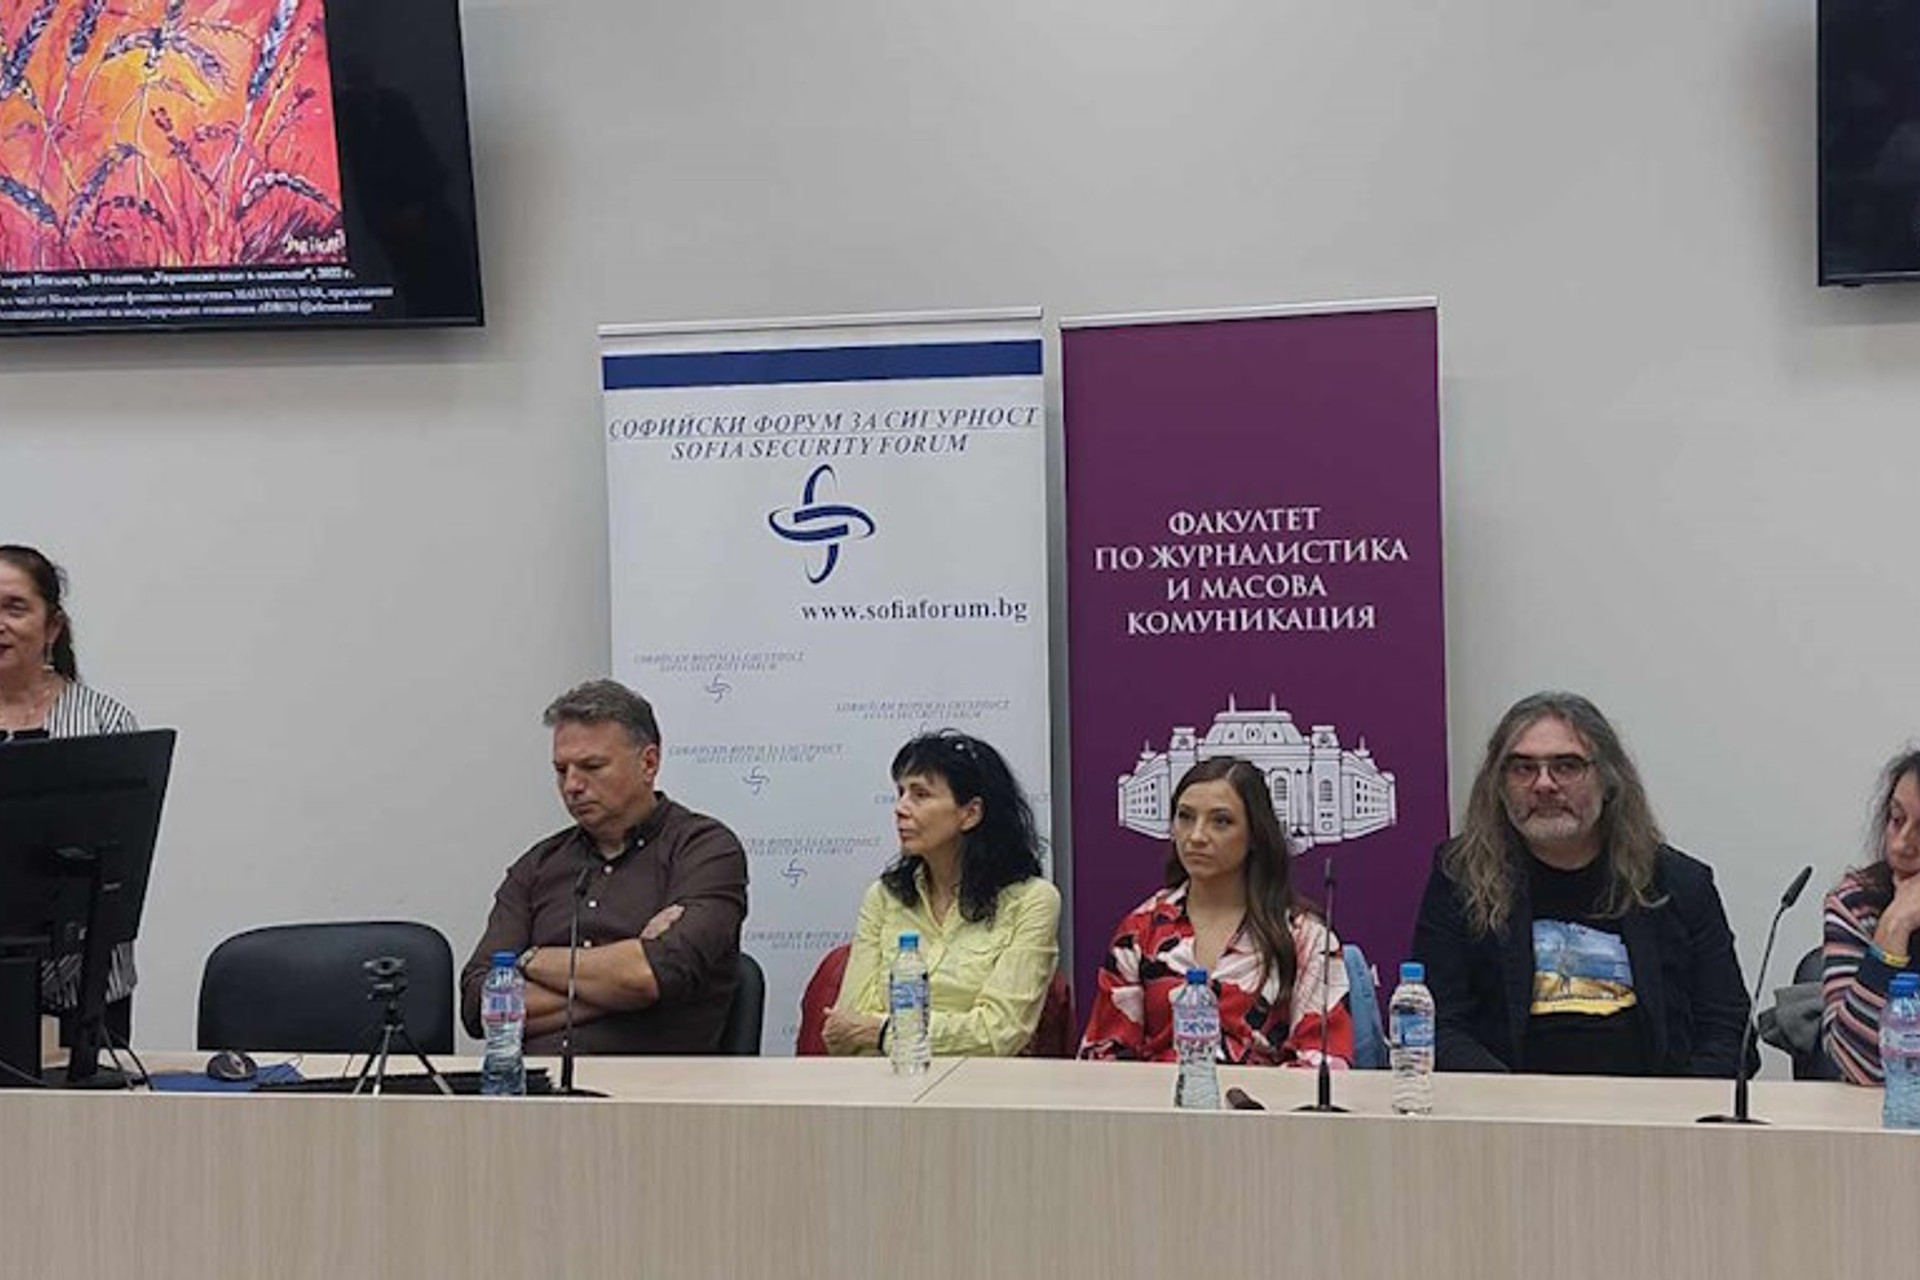 UKRAINE THROUGH THE EYES OF BULGARIAN JOURNALISTS WHO VISITED THE COUNTRY